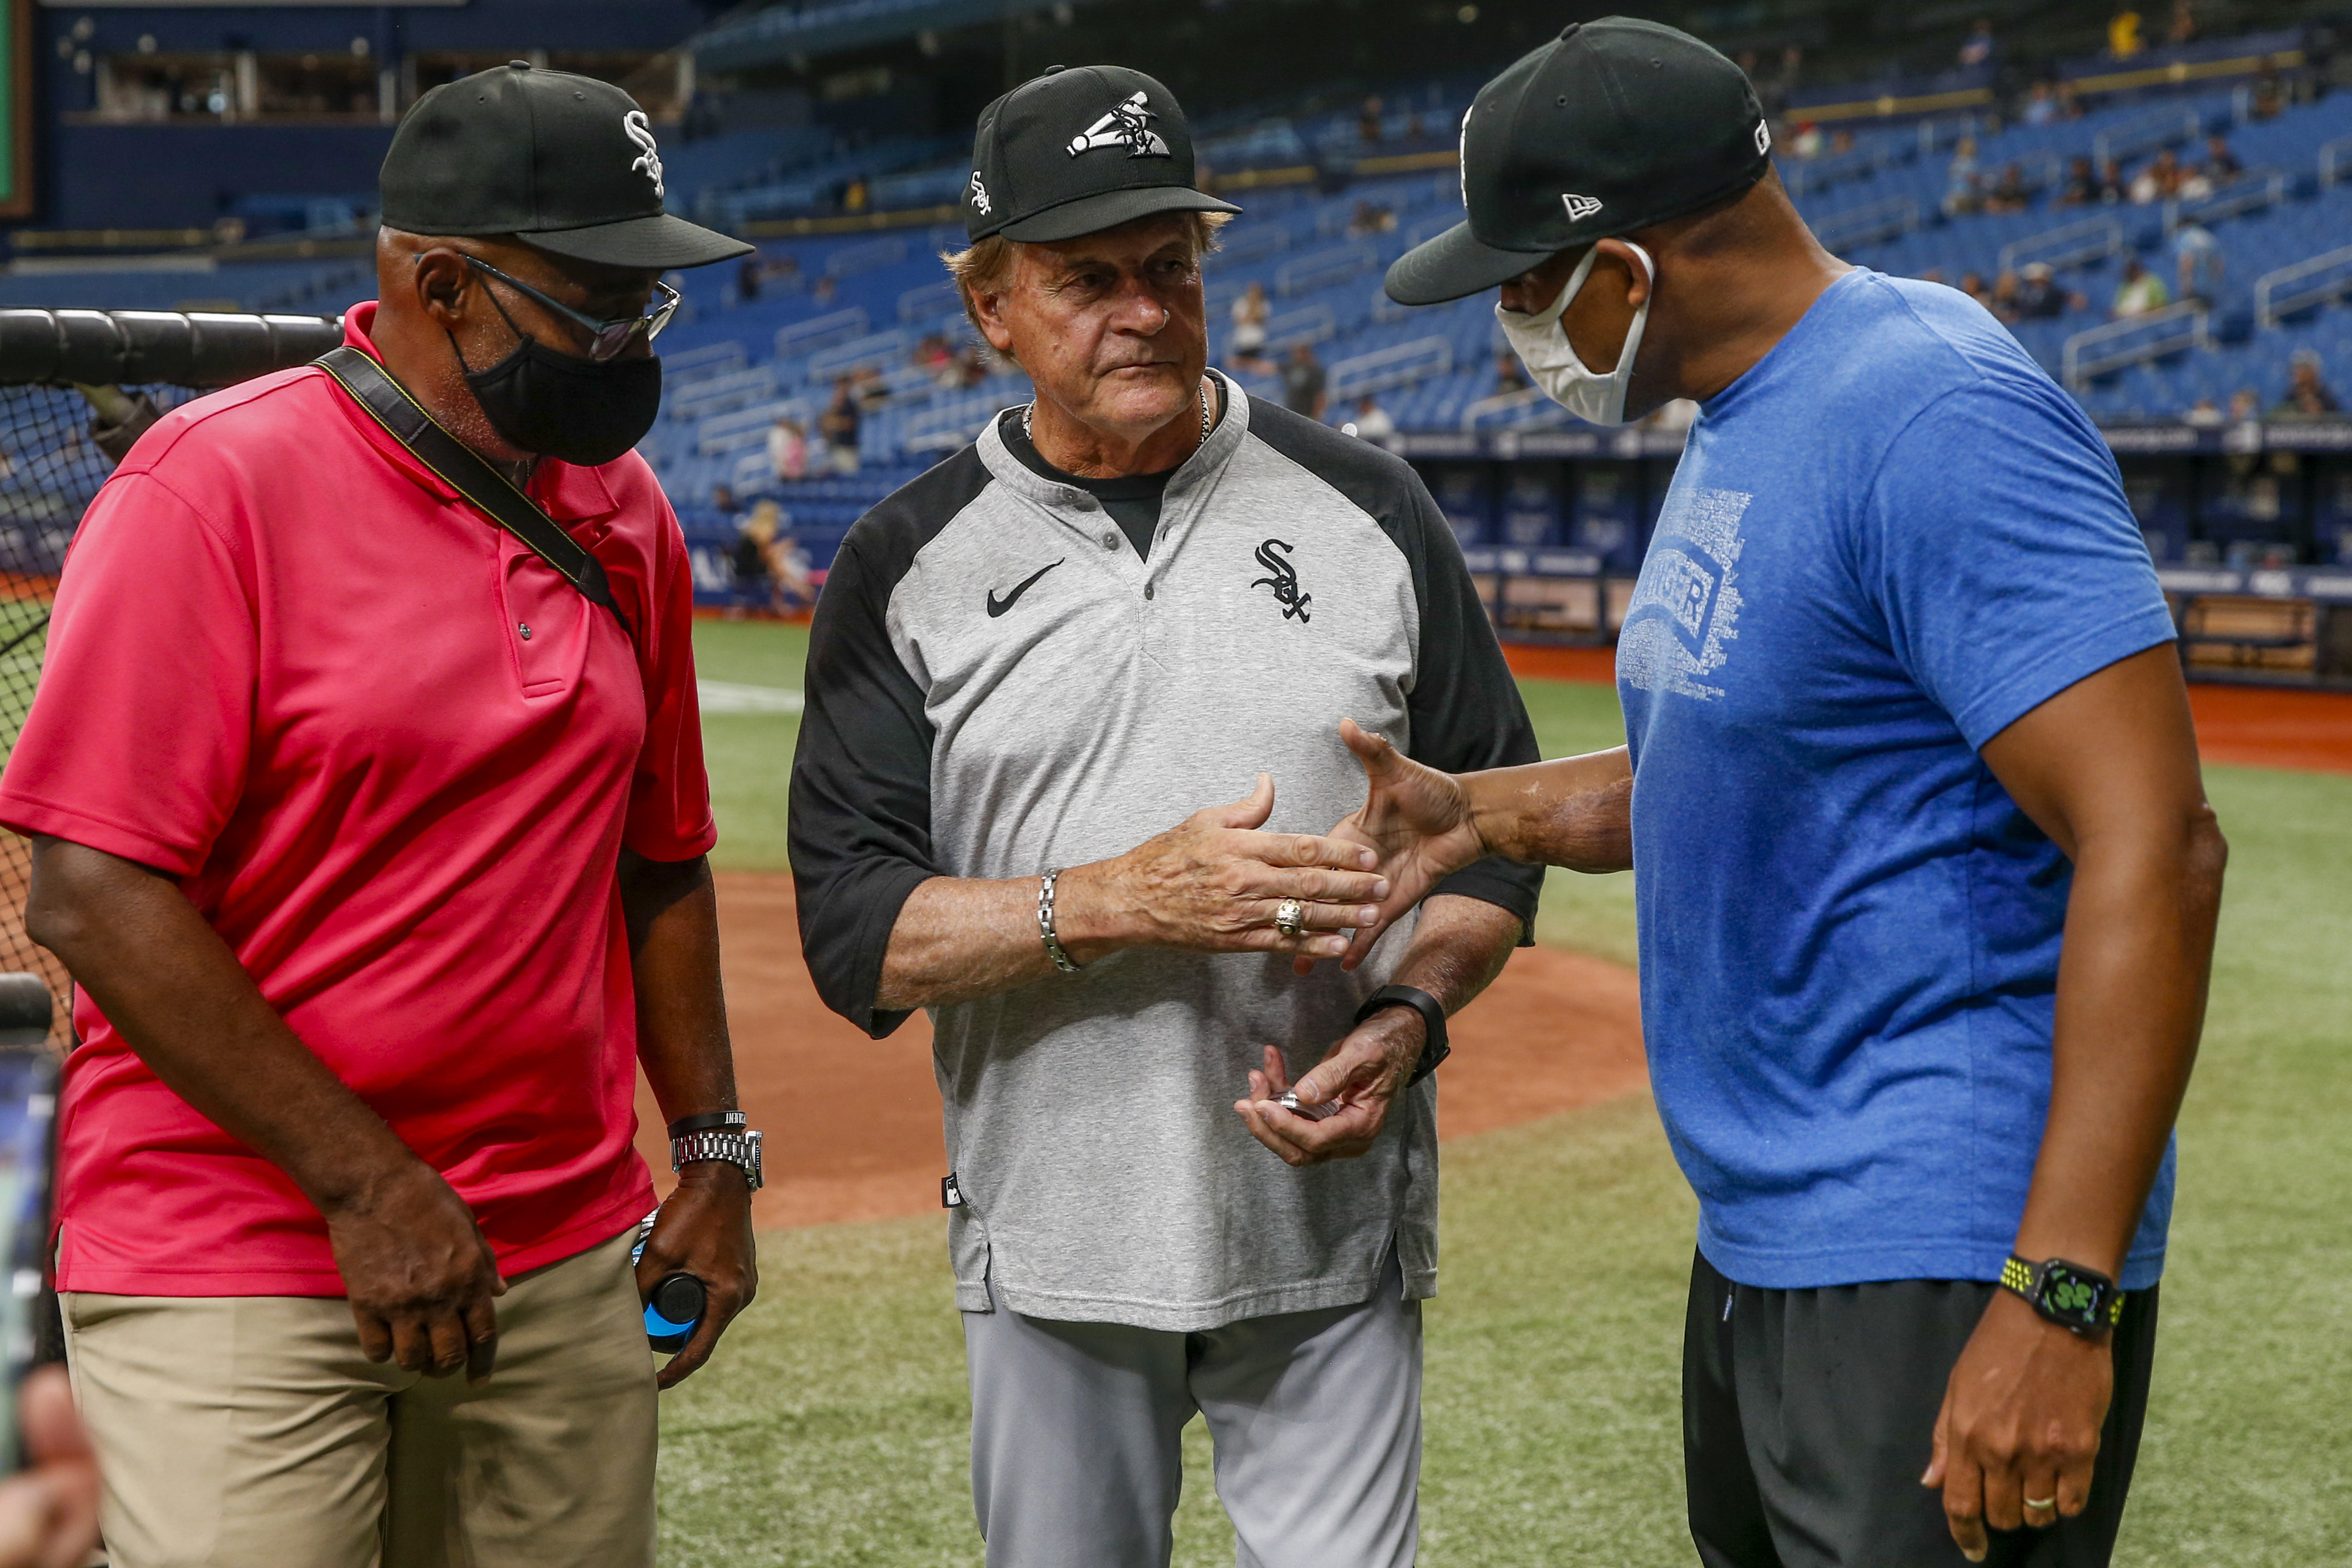 La Russa feels fortunate for chance to manage White Sox